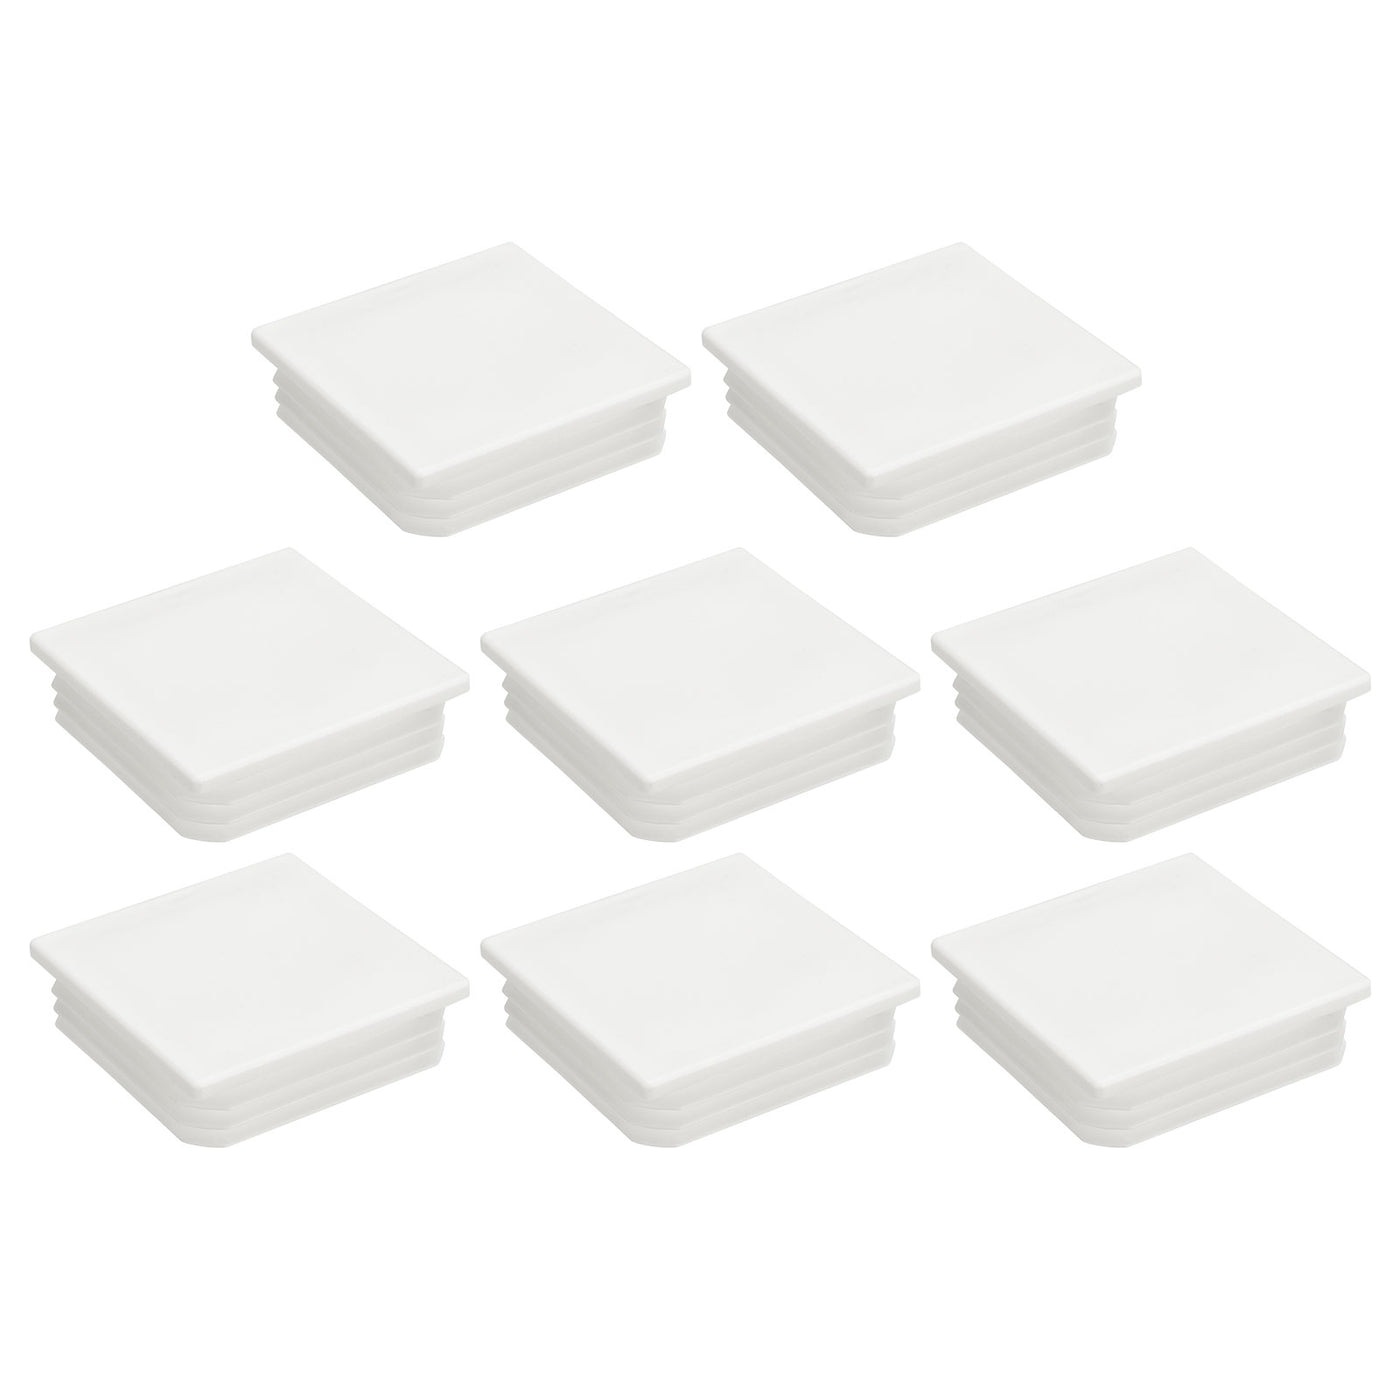 uxcell Uxcell 8Pcs 70mmx70mm(2.76inch) Plastic Tubing Plug Square Post End Caps White